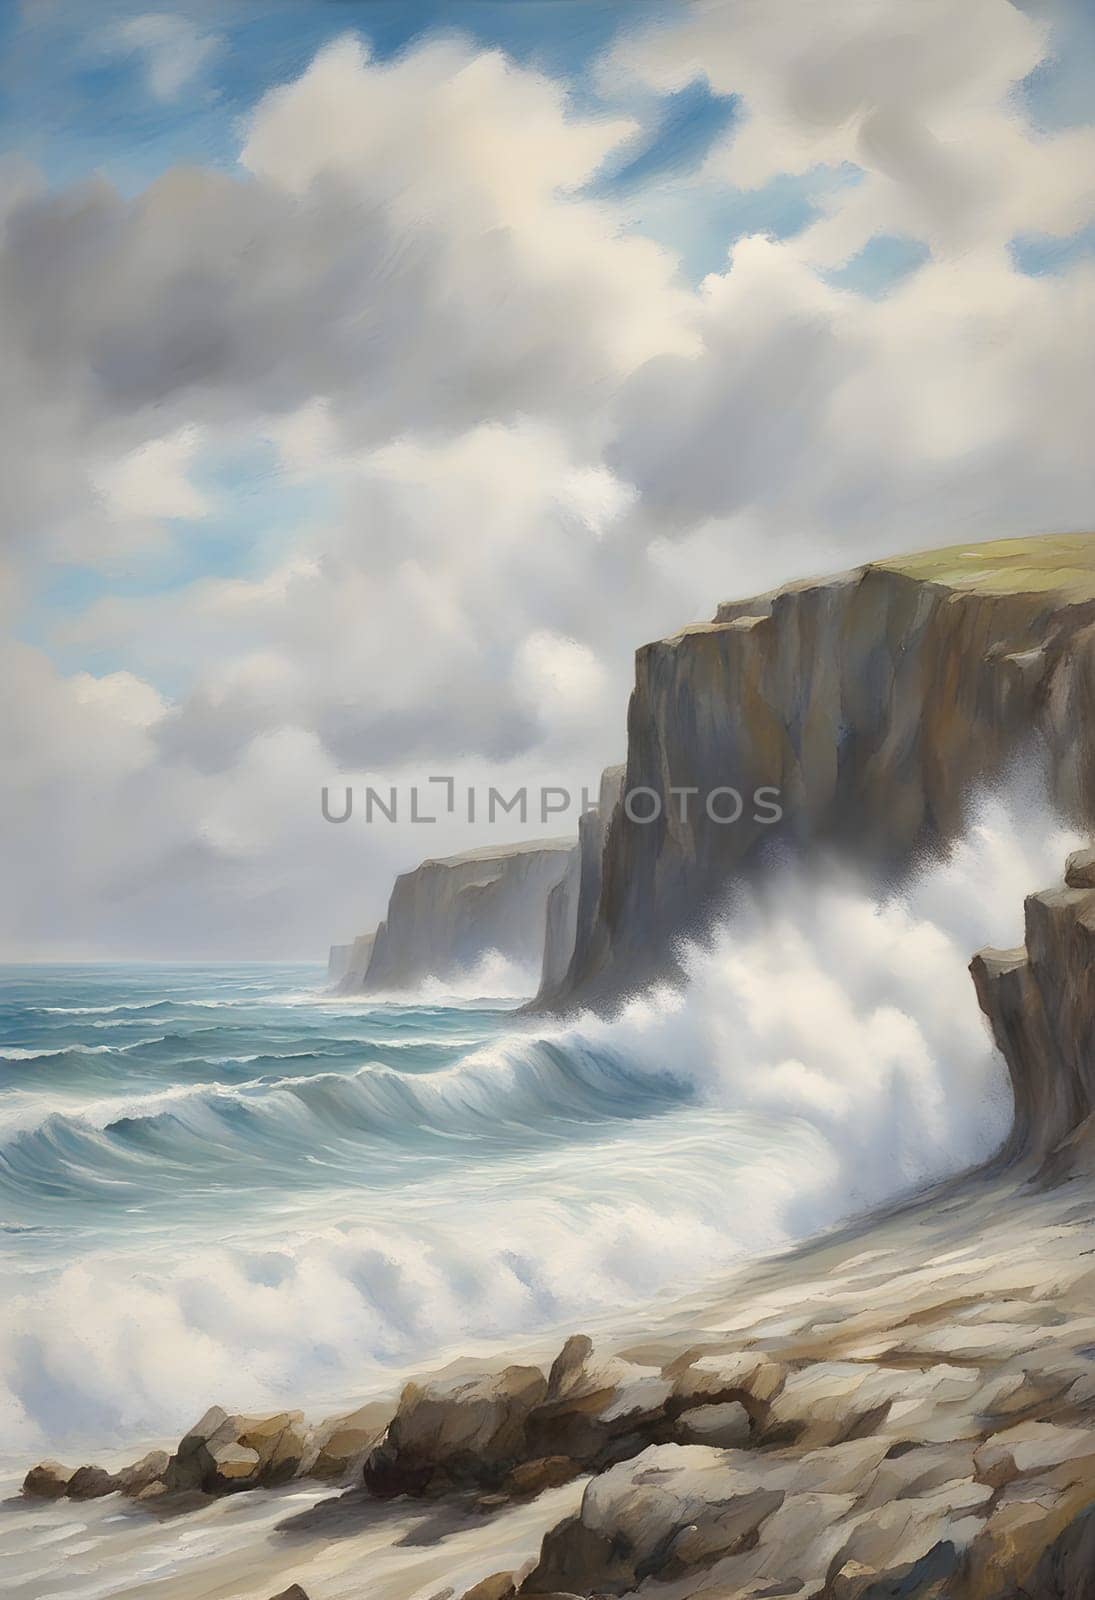 The image shows a painting of a beach with waves crashing against the cliffs. The waves are white and foamy and the cliffs are gray and rough. The sea is blue and there are white clouds in the sky. Generate AI